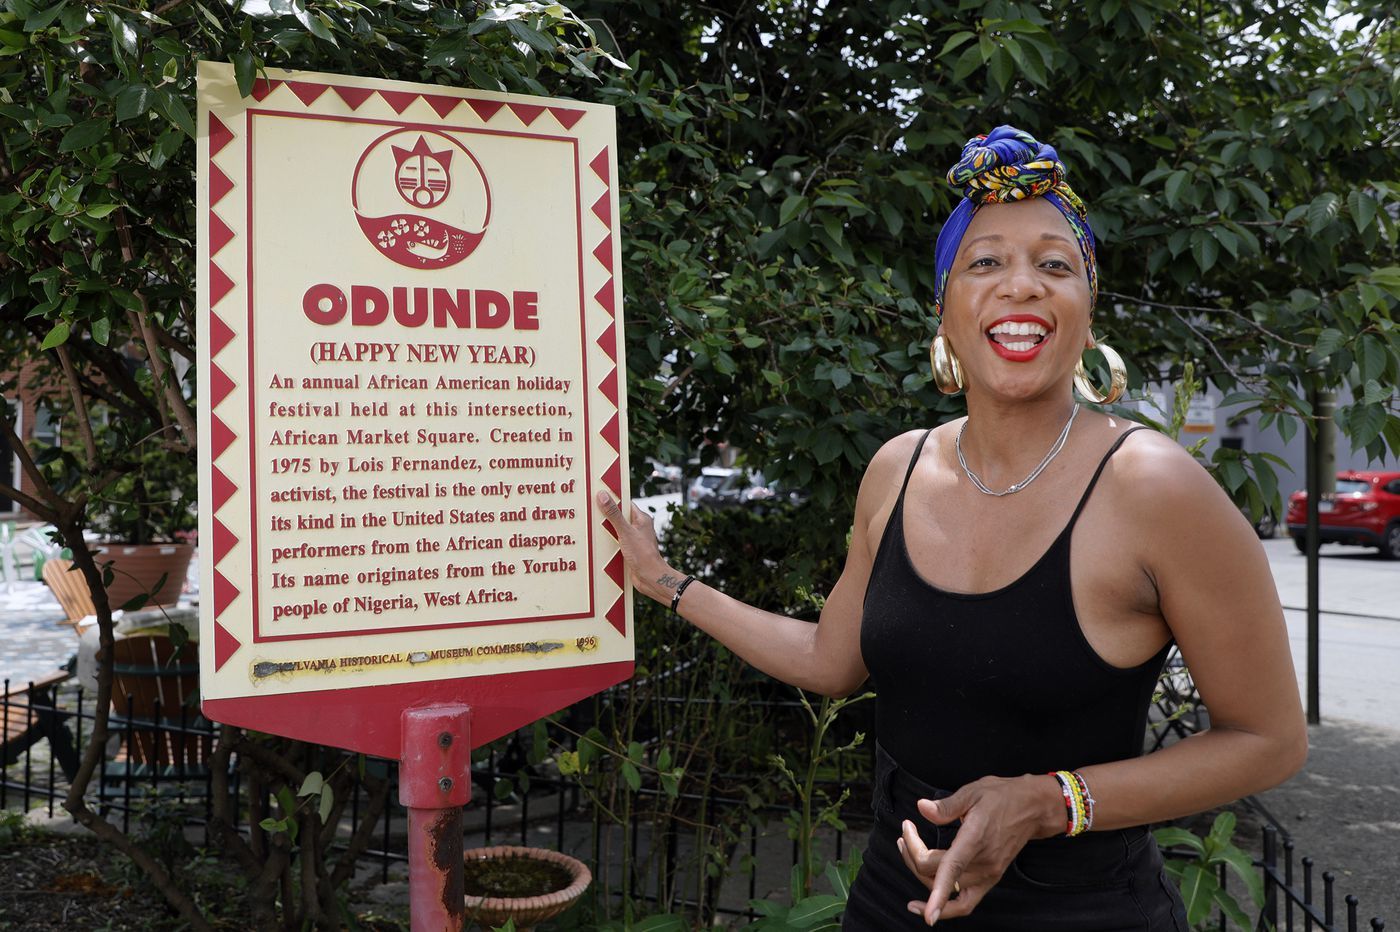 OshunBumi Fernandez-West, CEO of ODUNDE, at 23rd and South St., on June 5, 2020. Image by Elizabeth Robertson / The Philadelphia Inquirer. United States, 2020.